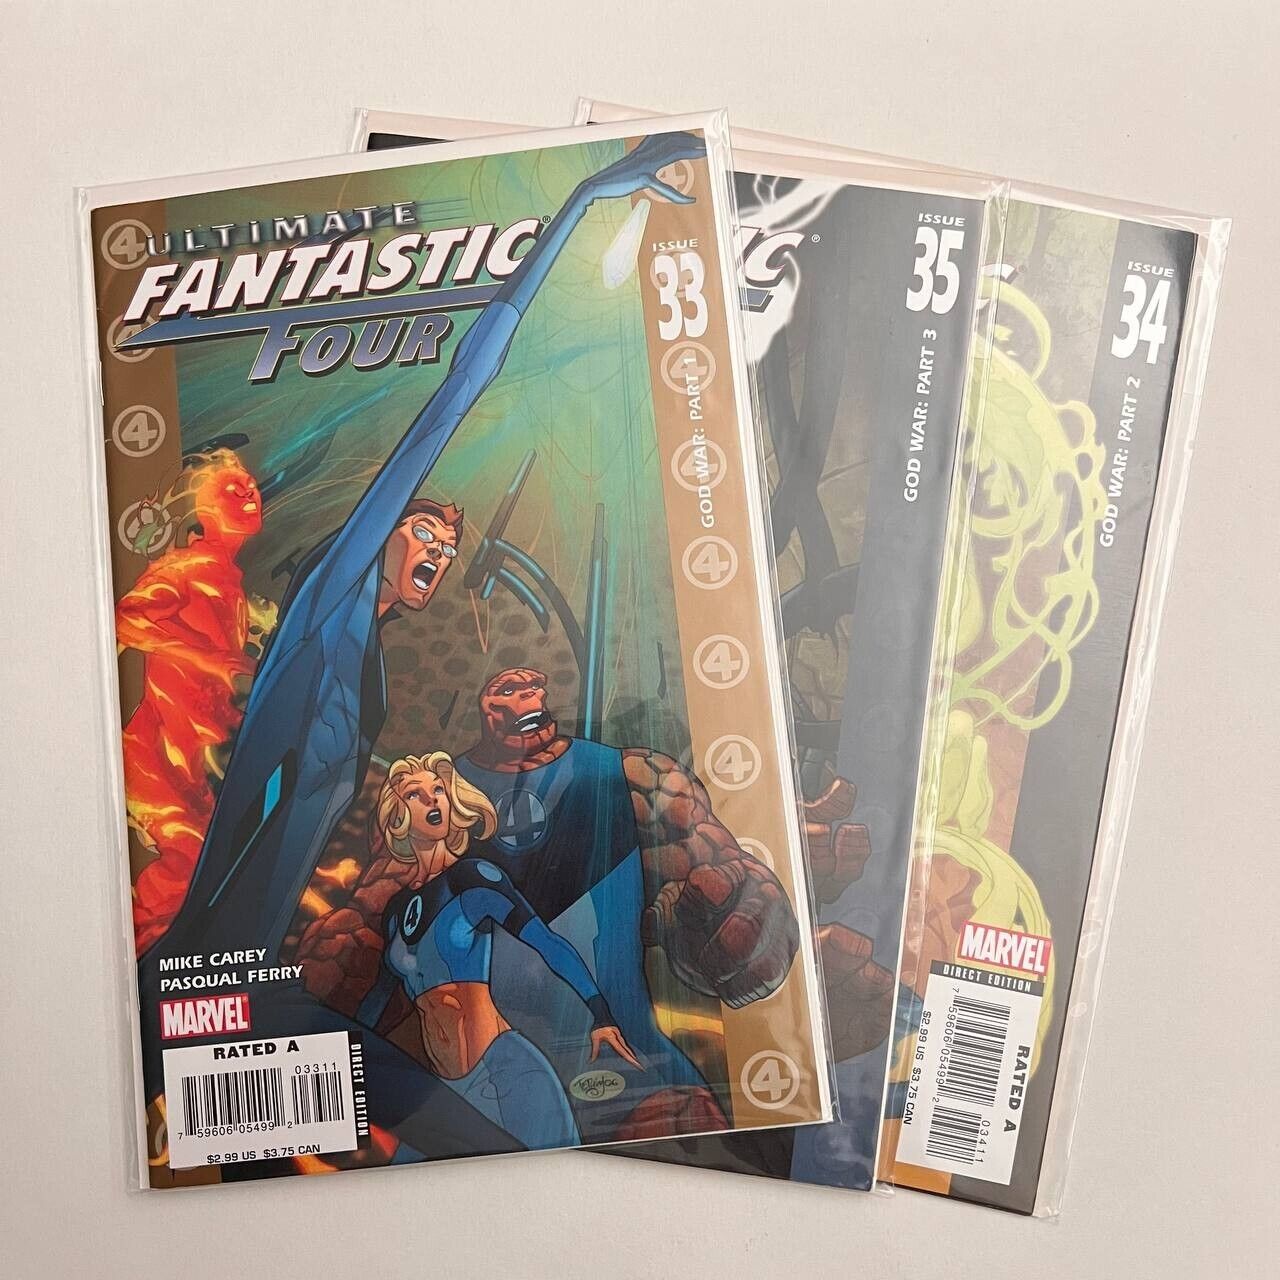 ULTIMATE FANTASTIC FOUR LOT - 3 ISSUES #33 to #35 - MARVEL COMIC  -Free Shipping